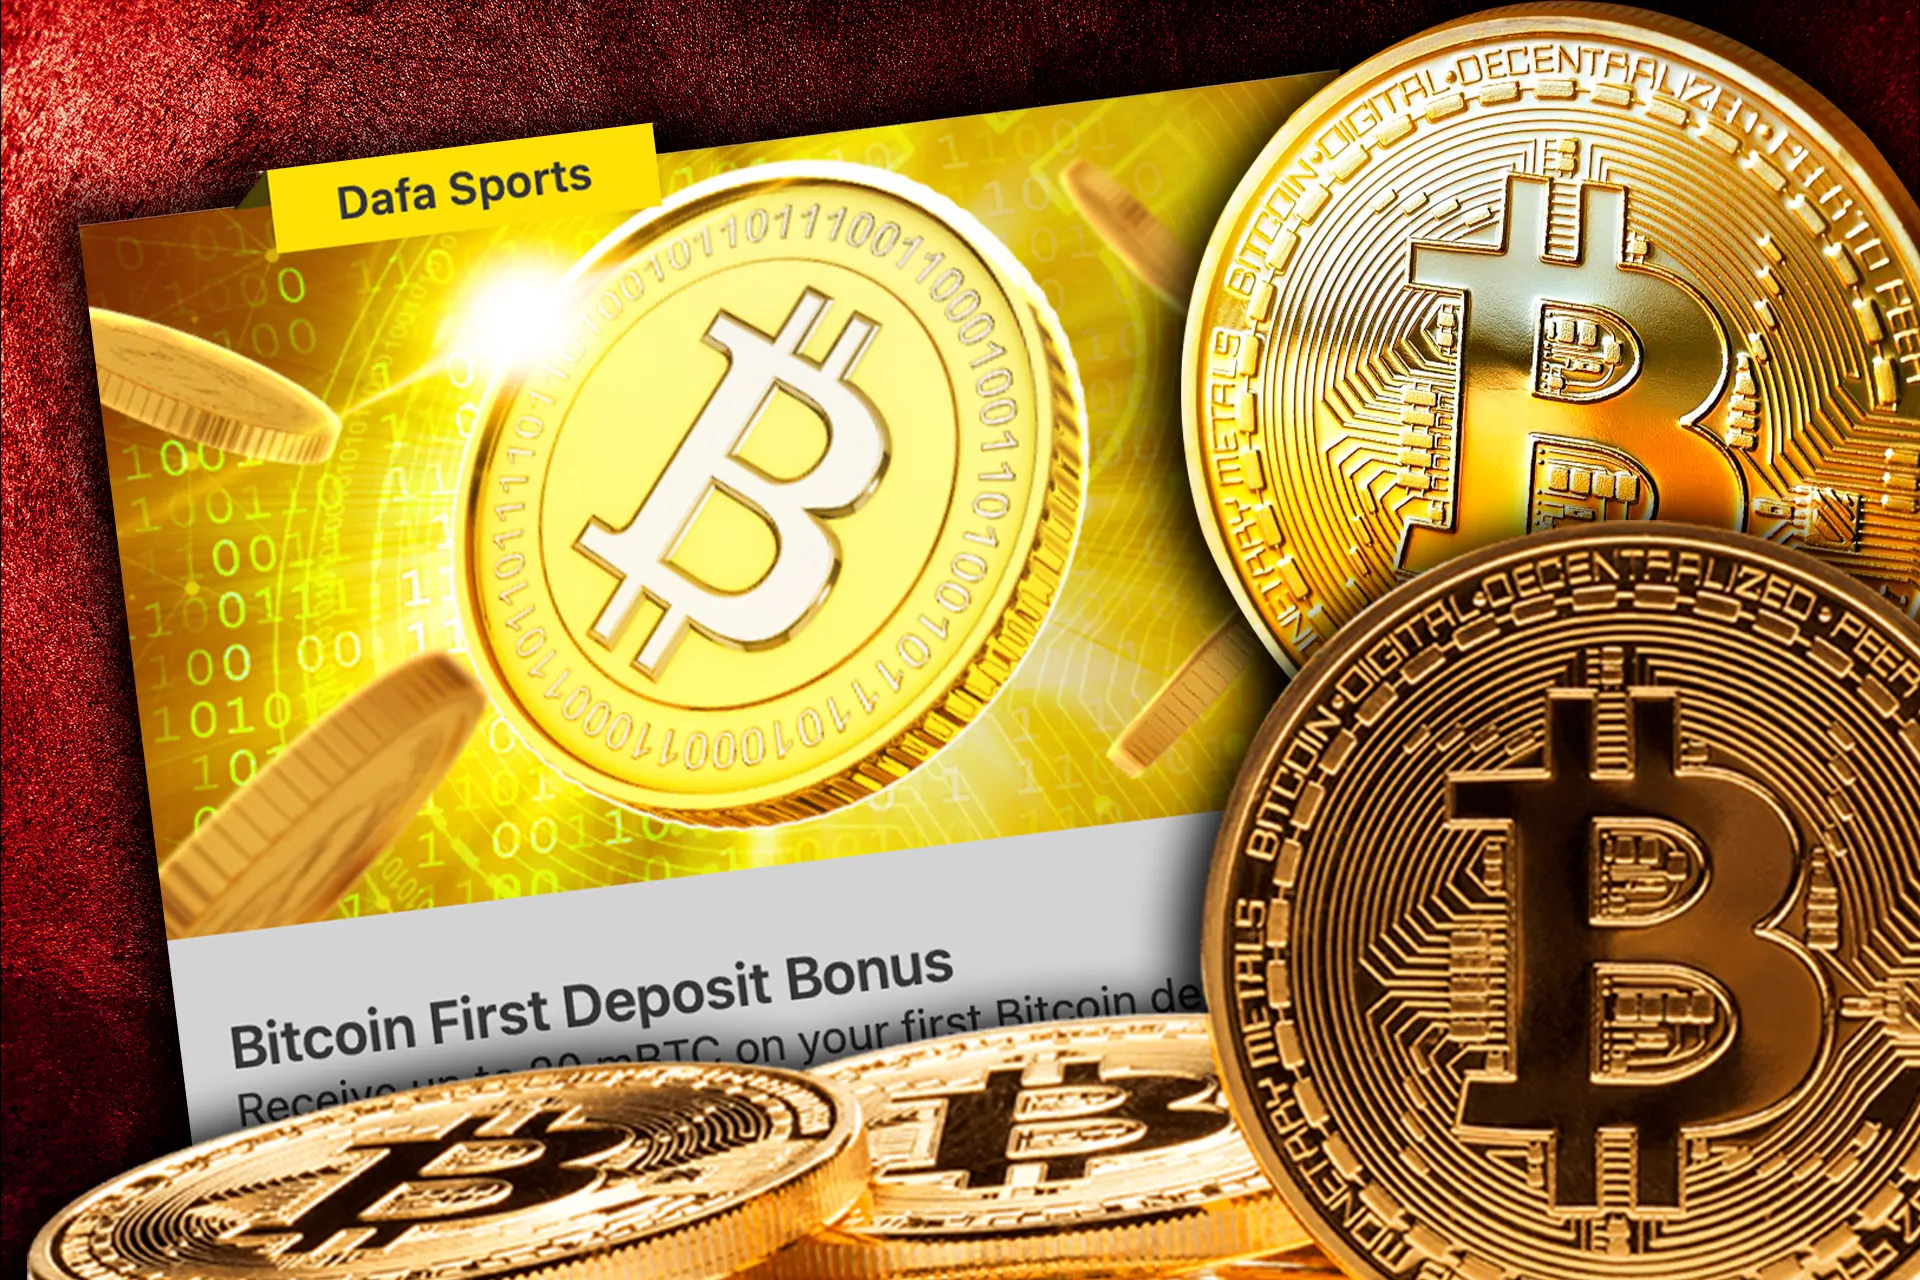 For new users who has cryptocurrency, there is also the additional first deposit bonus.